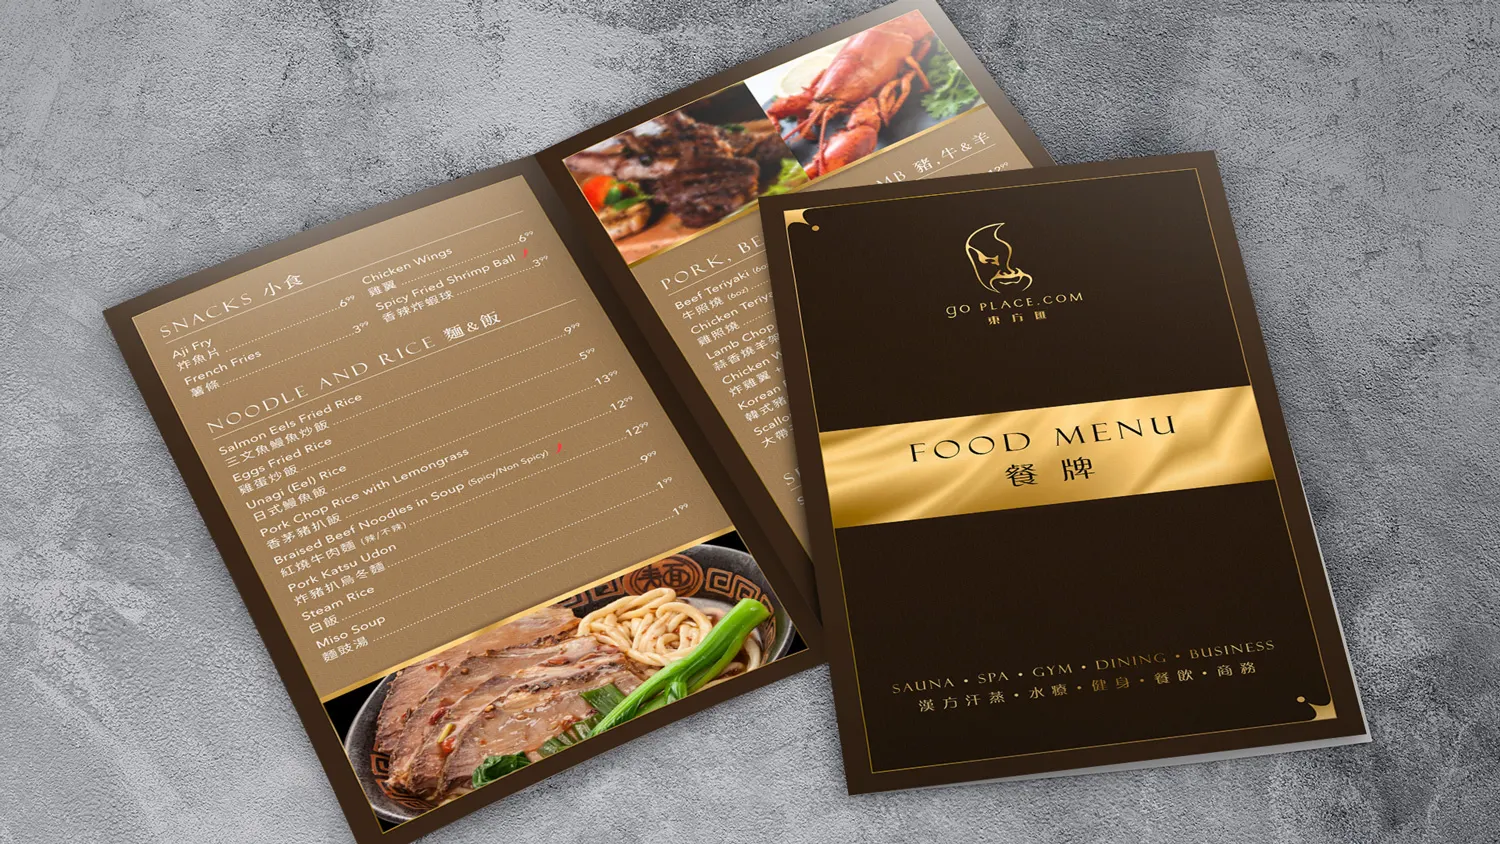 Graphic design project for Go Place 東方匯. Designed menus with a simple and elegant visual identity